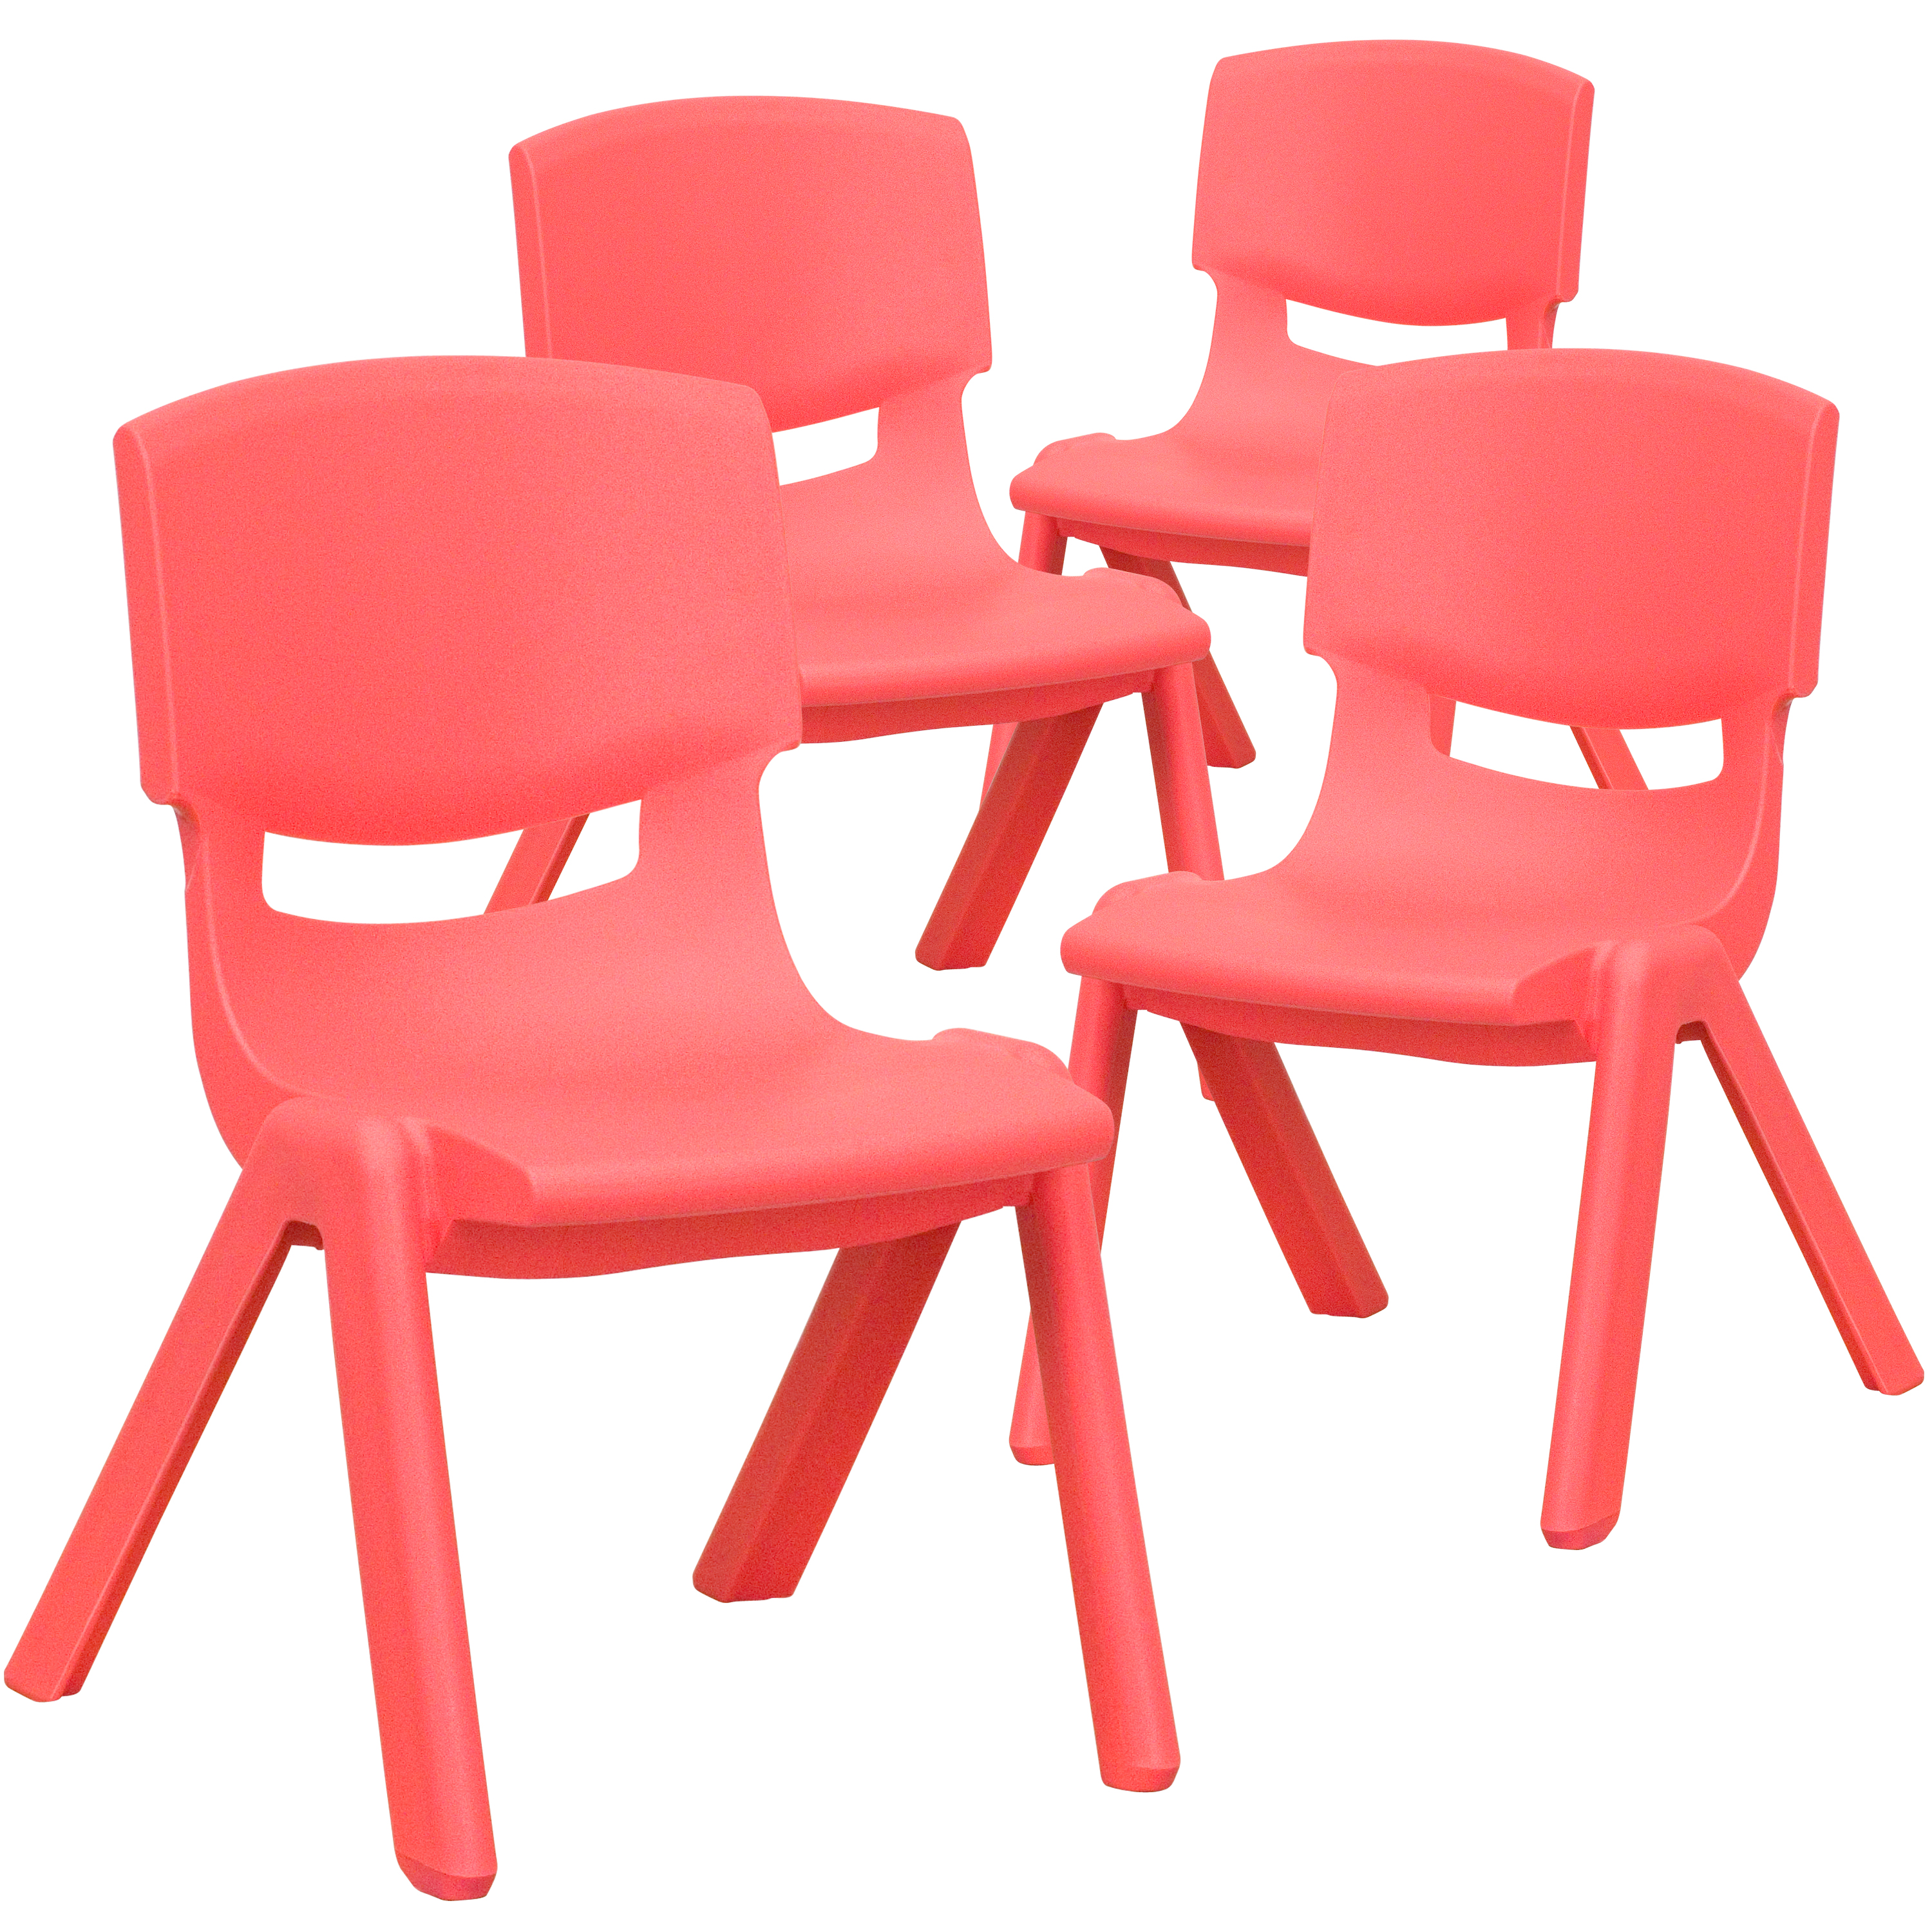 Flash Furniture 4-YU-YCX4-003-RED-GG Red Plastic Stackable School Chair with 10.5'' Seat Height, 4 Pack